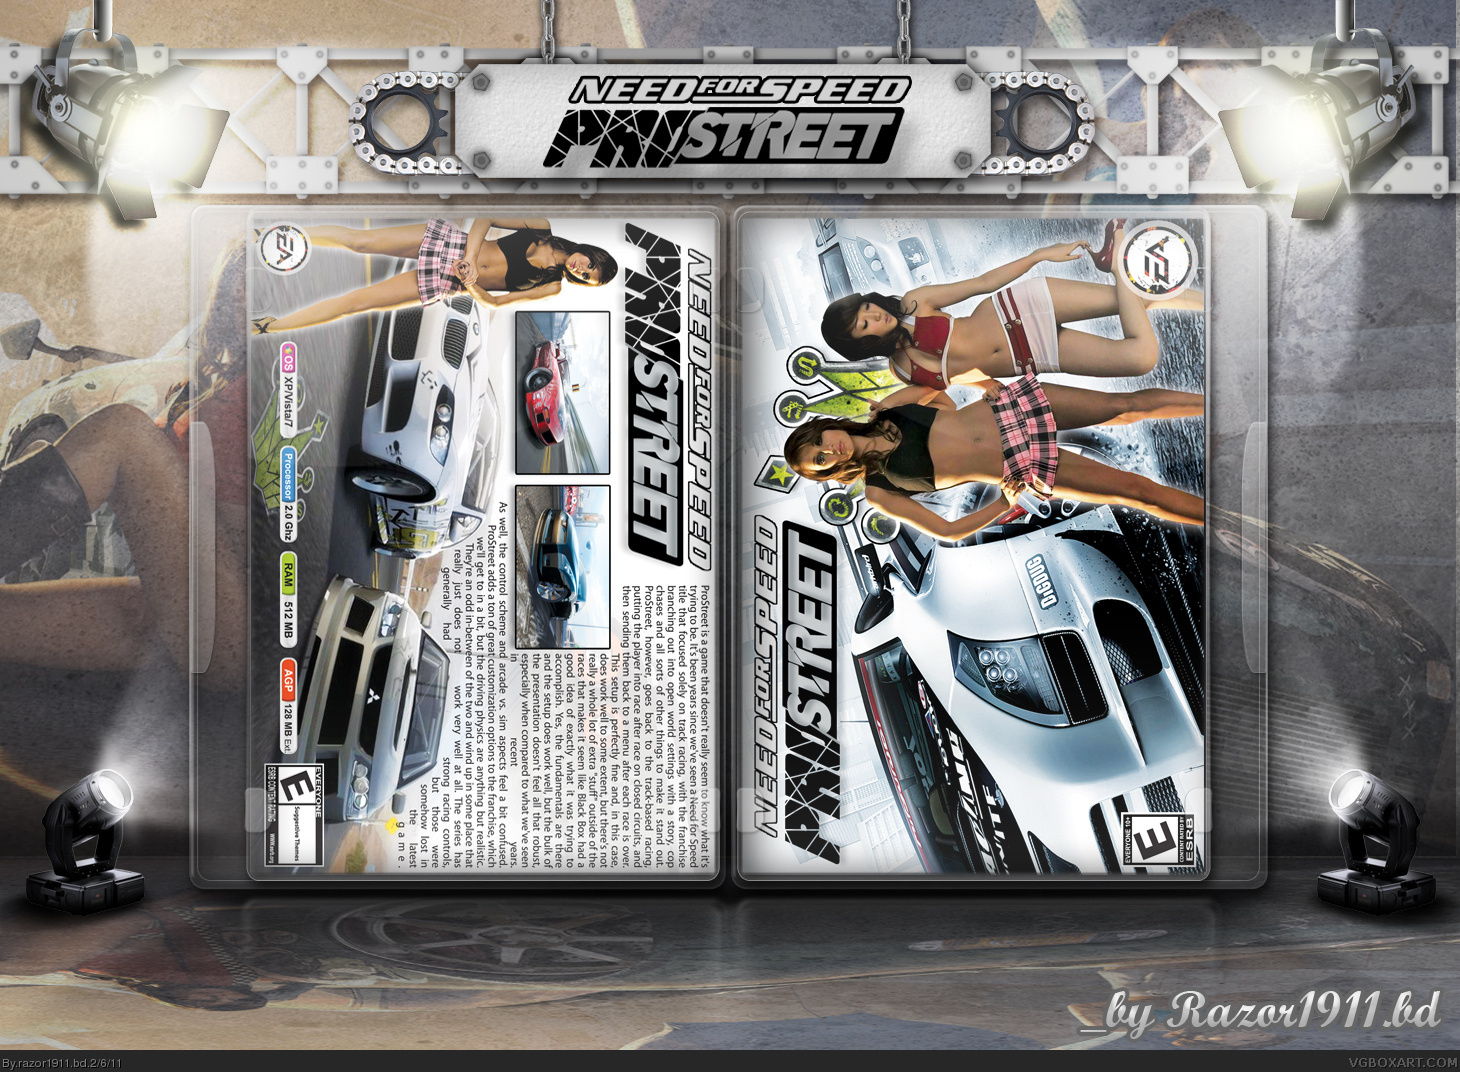 need for speed prostreet cheats pc